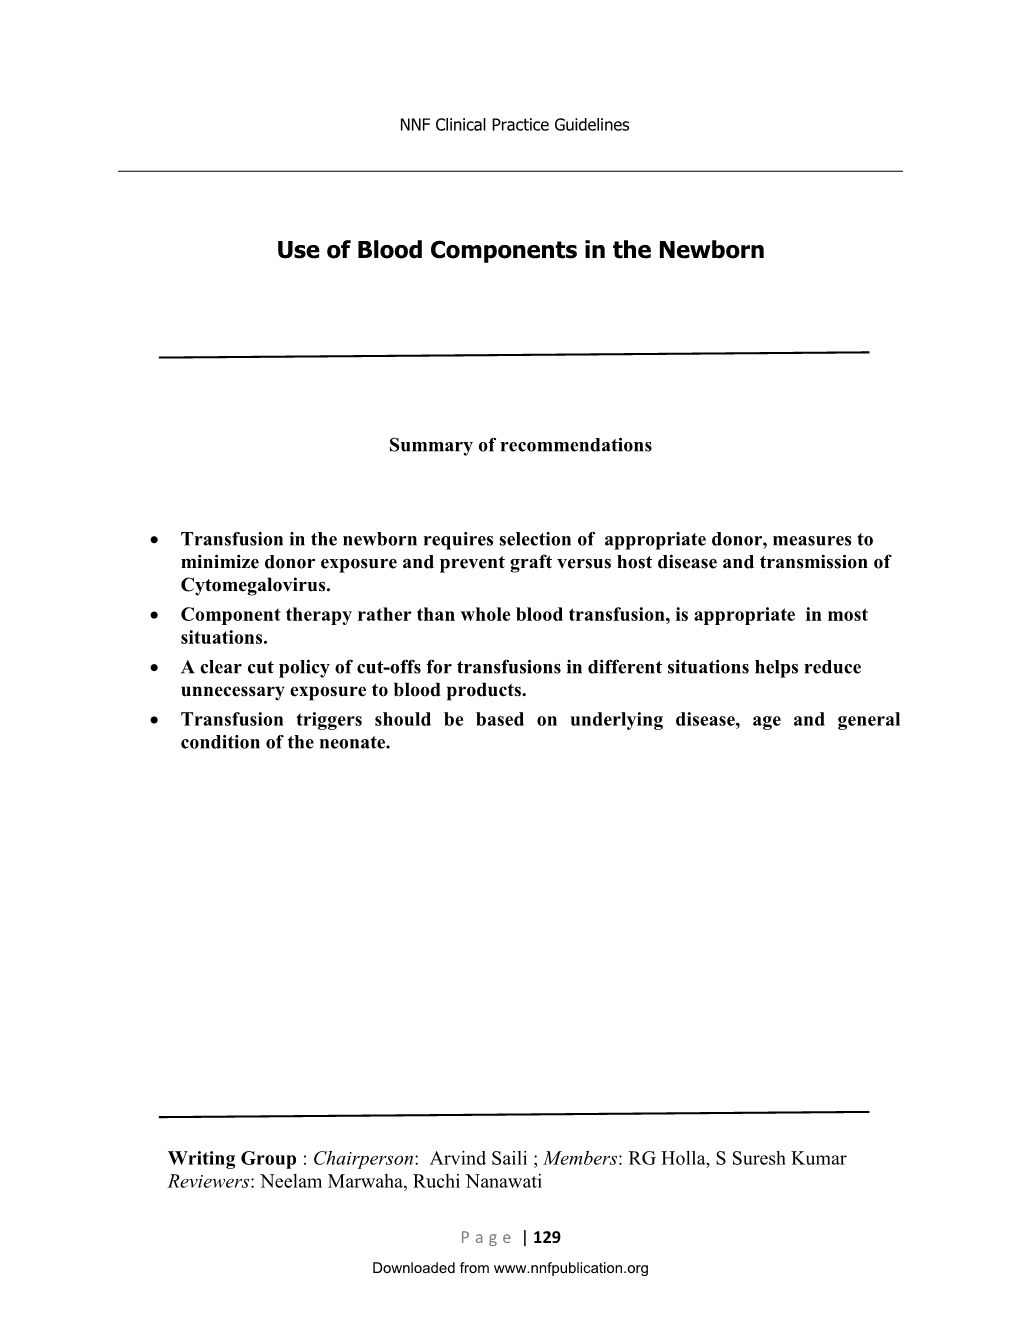 Use of Blood Components in the Newborn